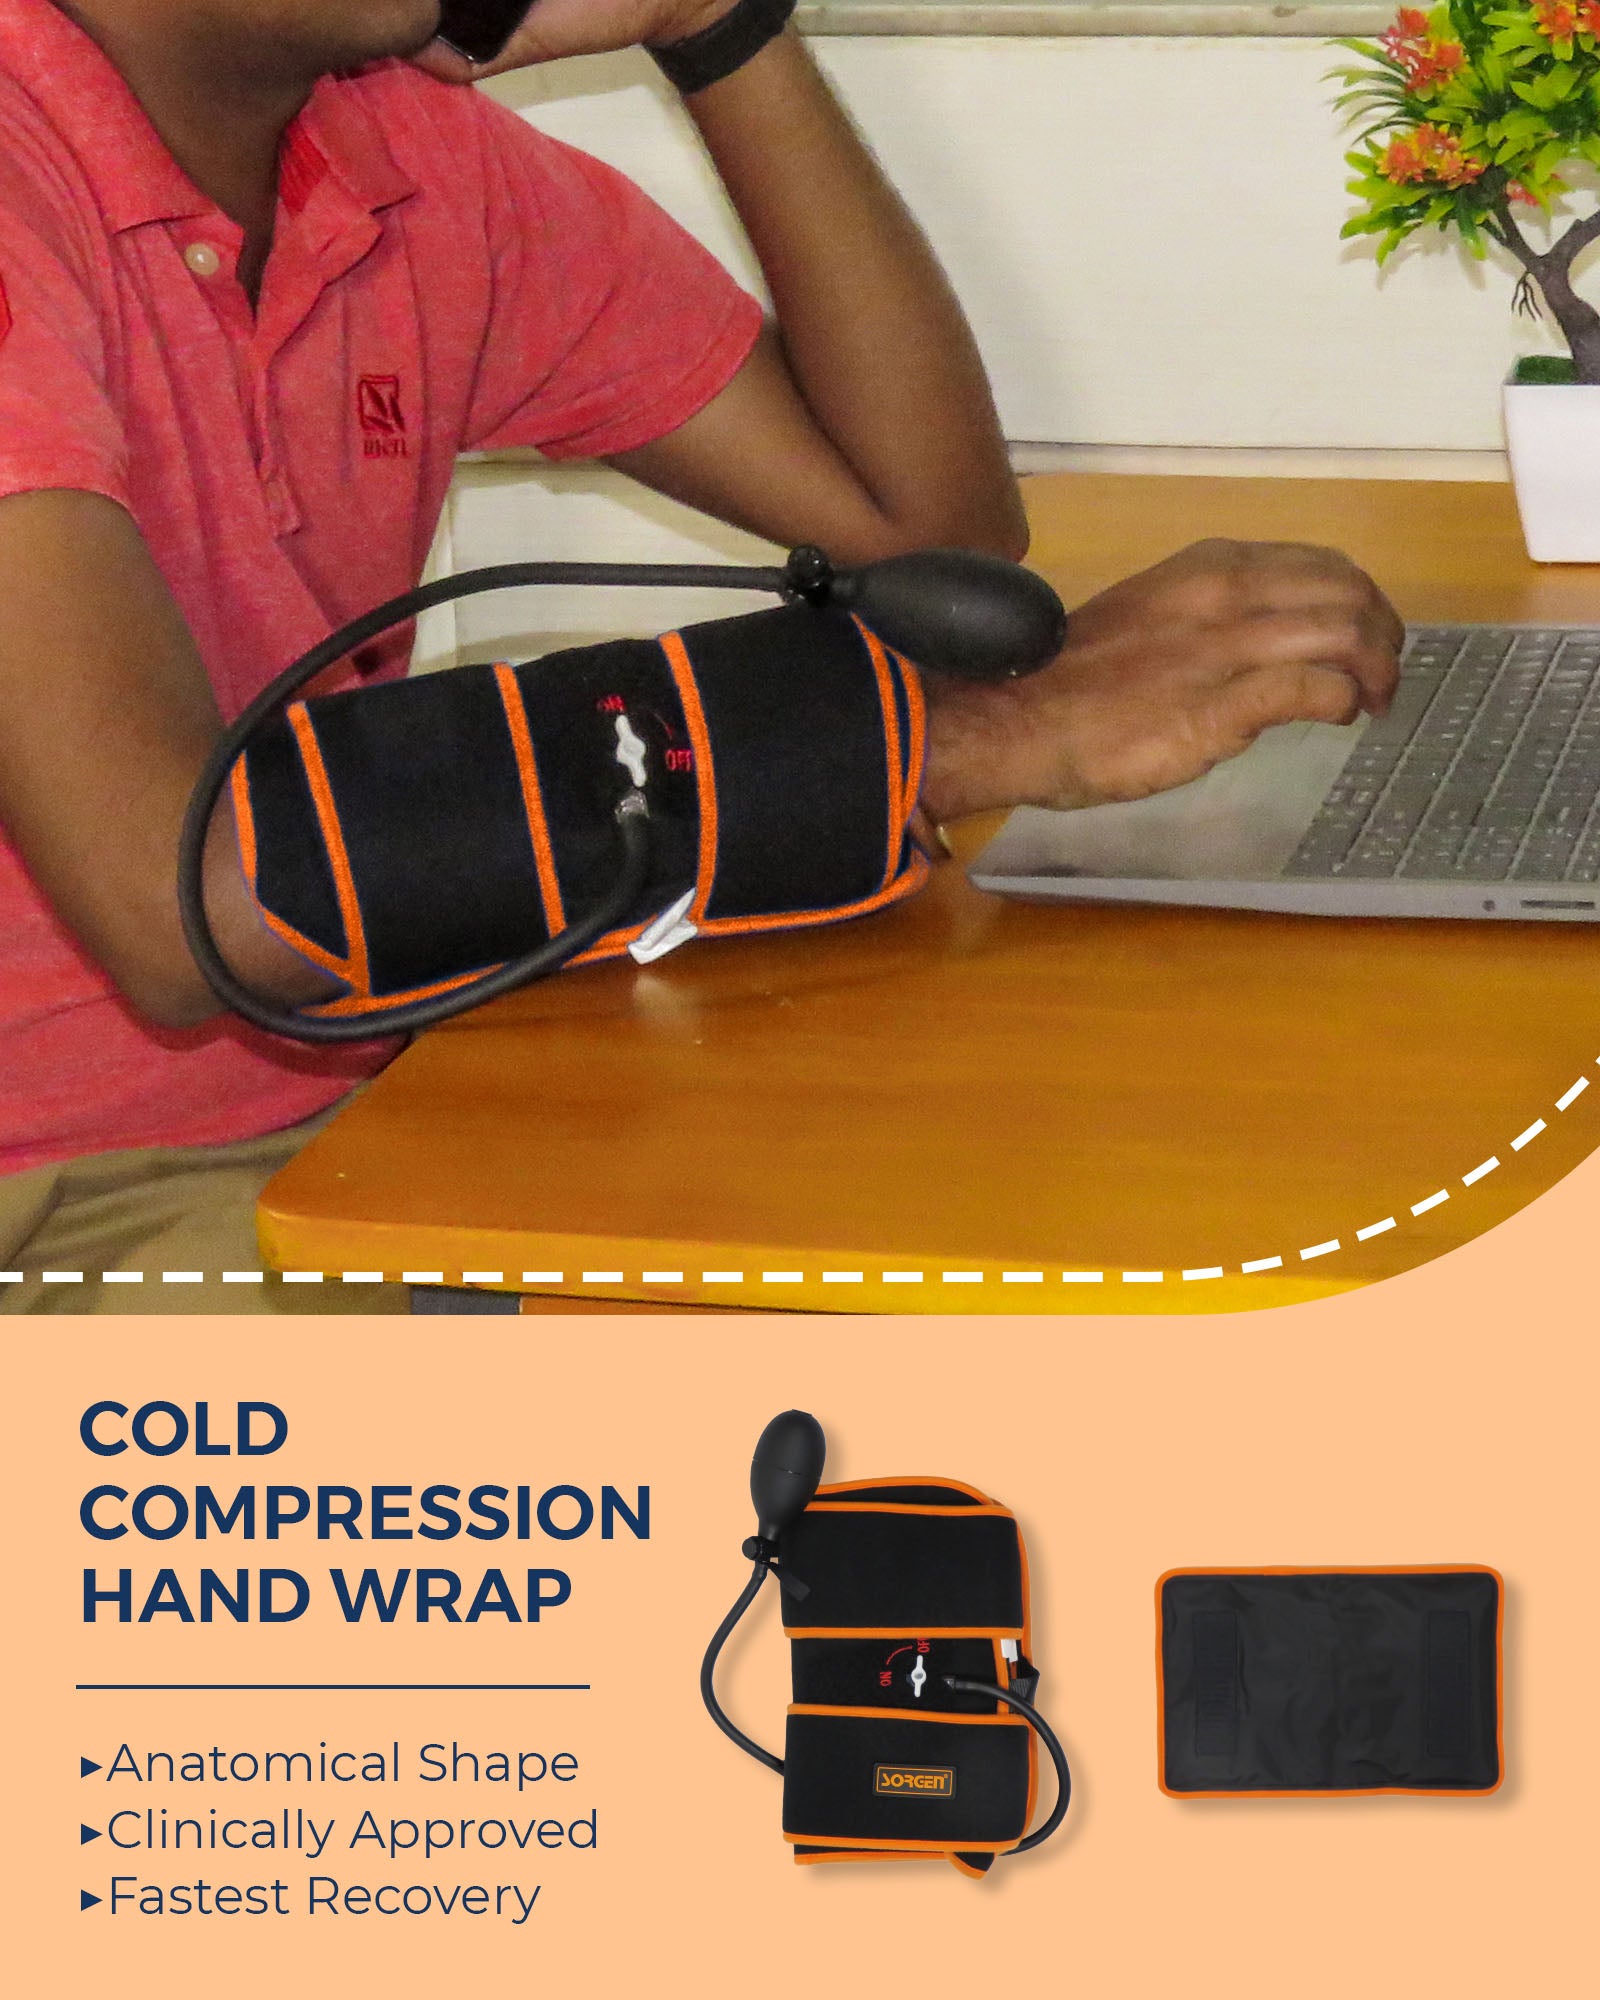 cold hand wraps